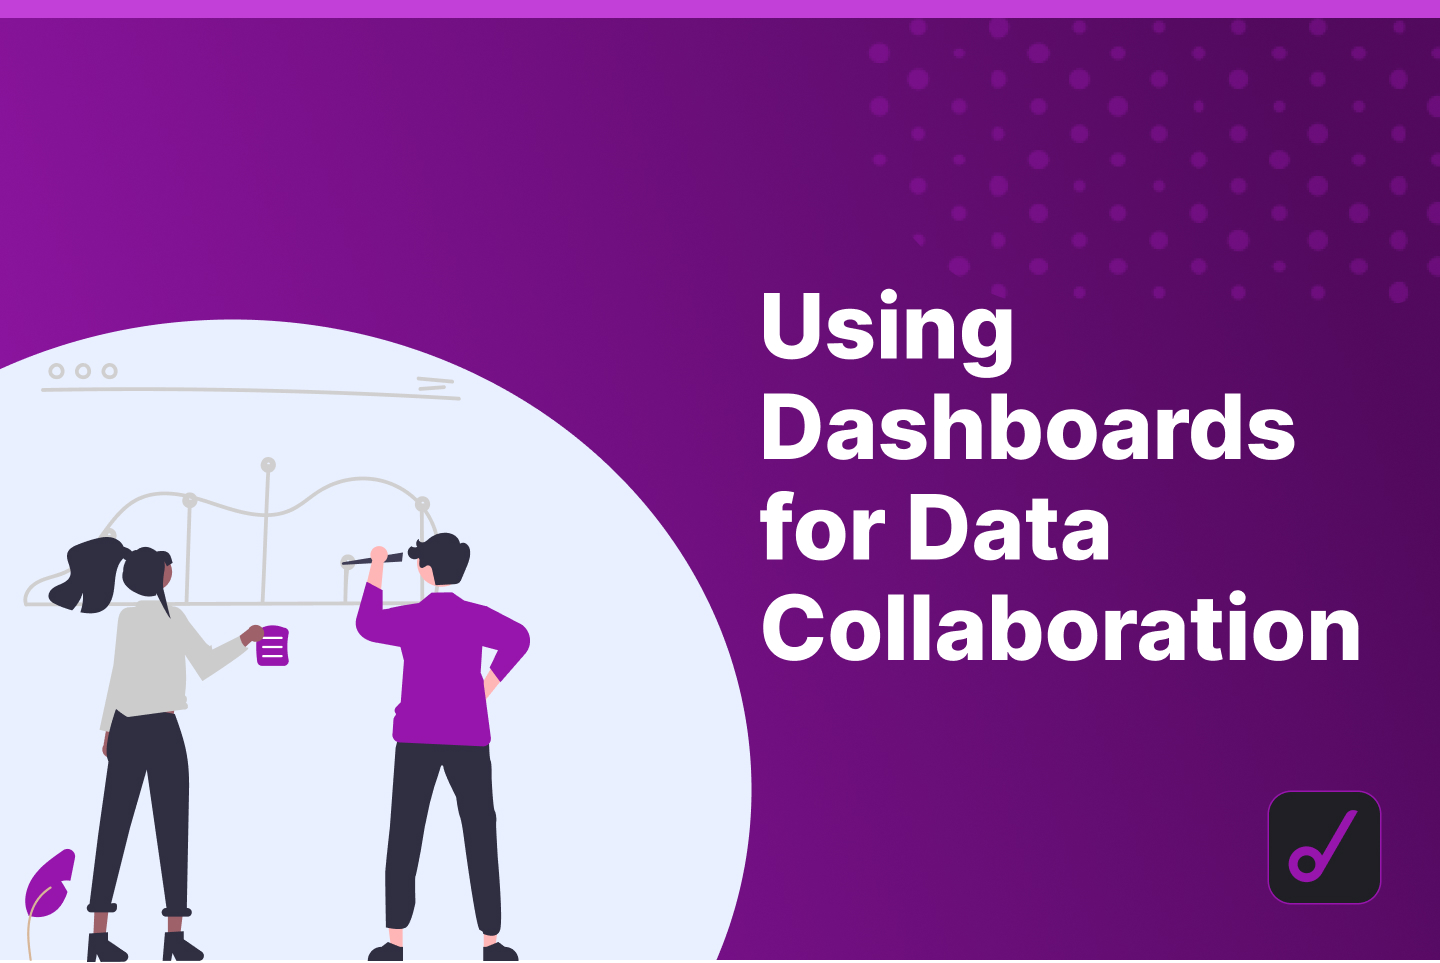 How to Use Dashboards for Data Collaboration